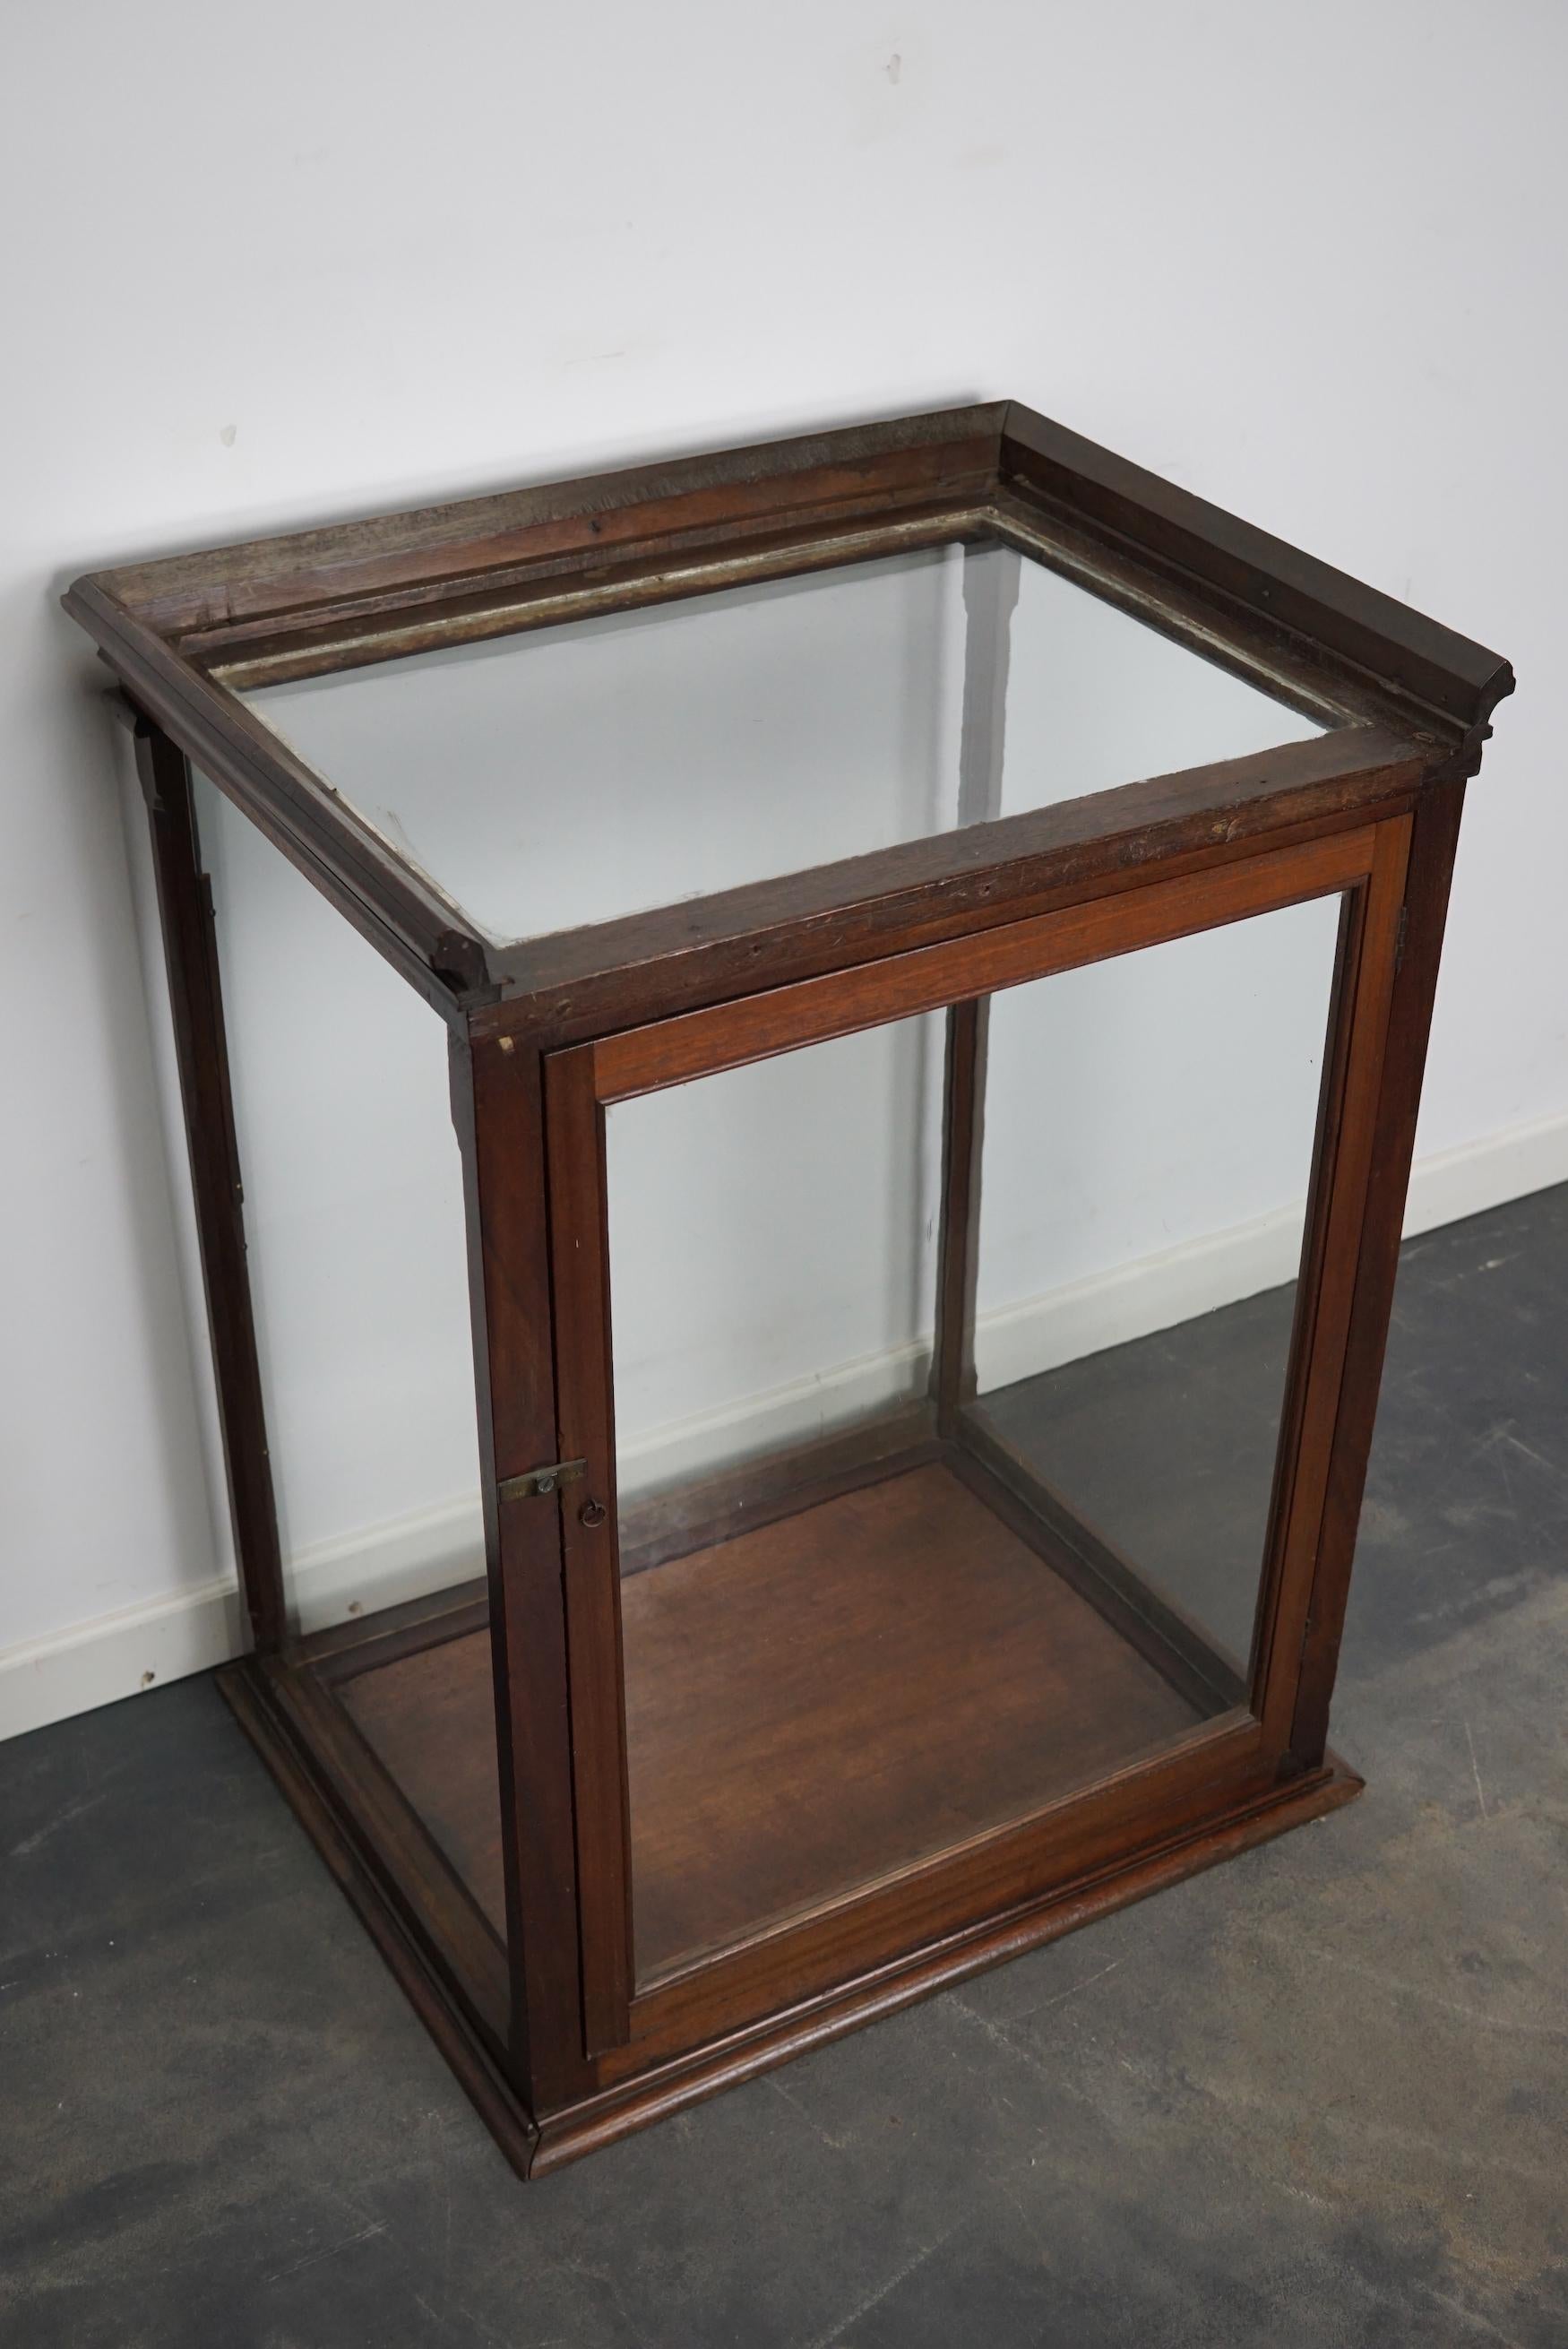 Victorian Mahogany Museum / Shop Display Cabinet or Vitrine, Late 19th Century For Sale 6